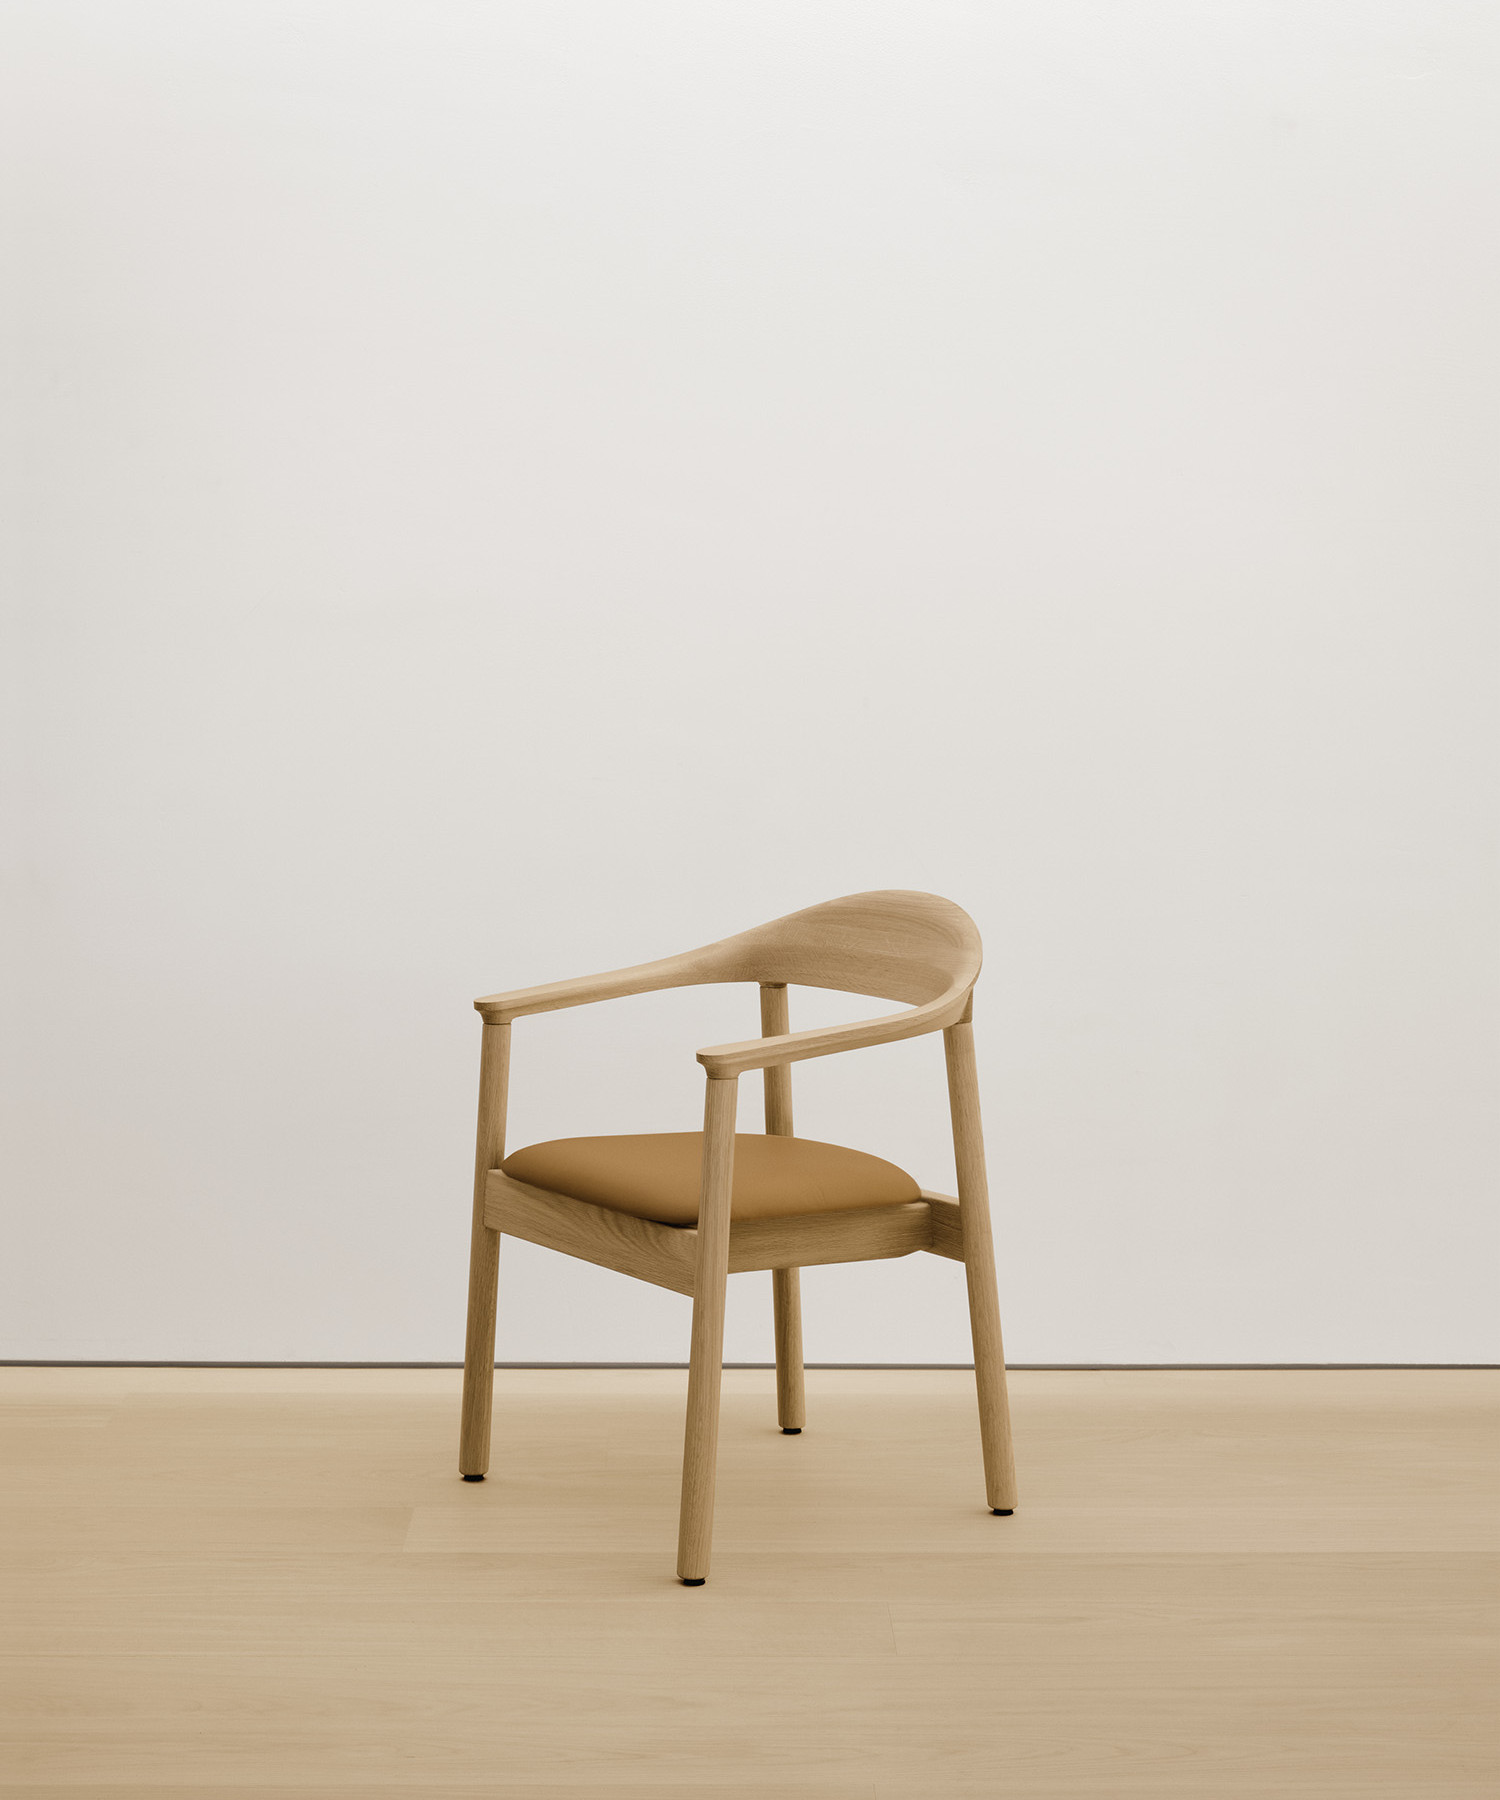  chair with solid wood seat